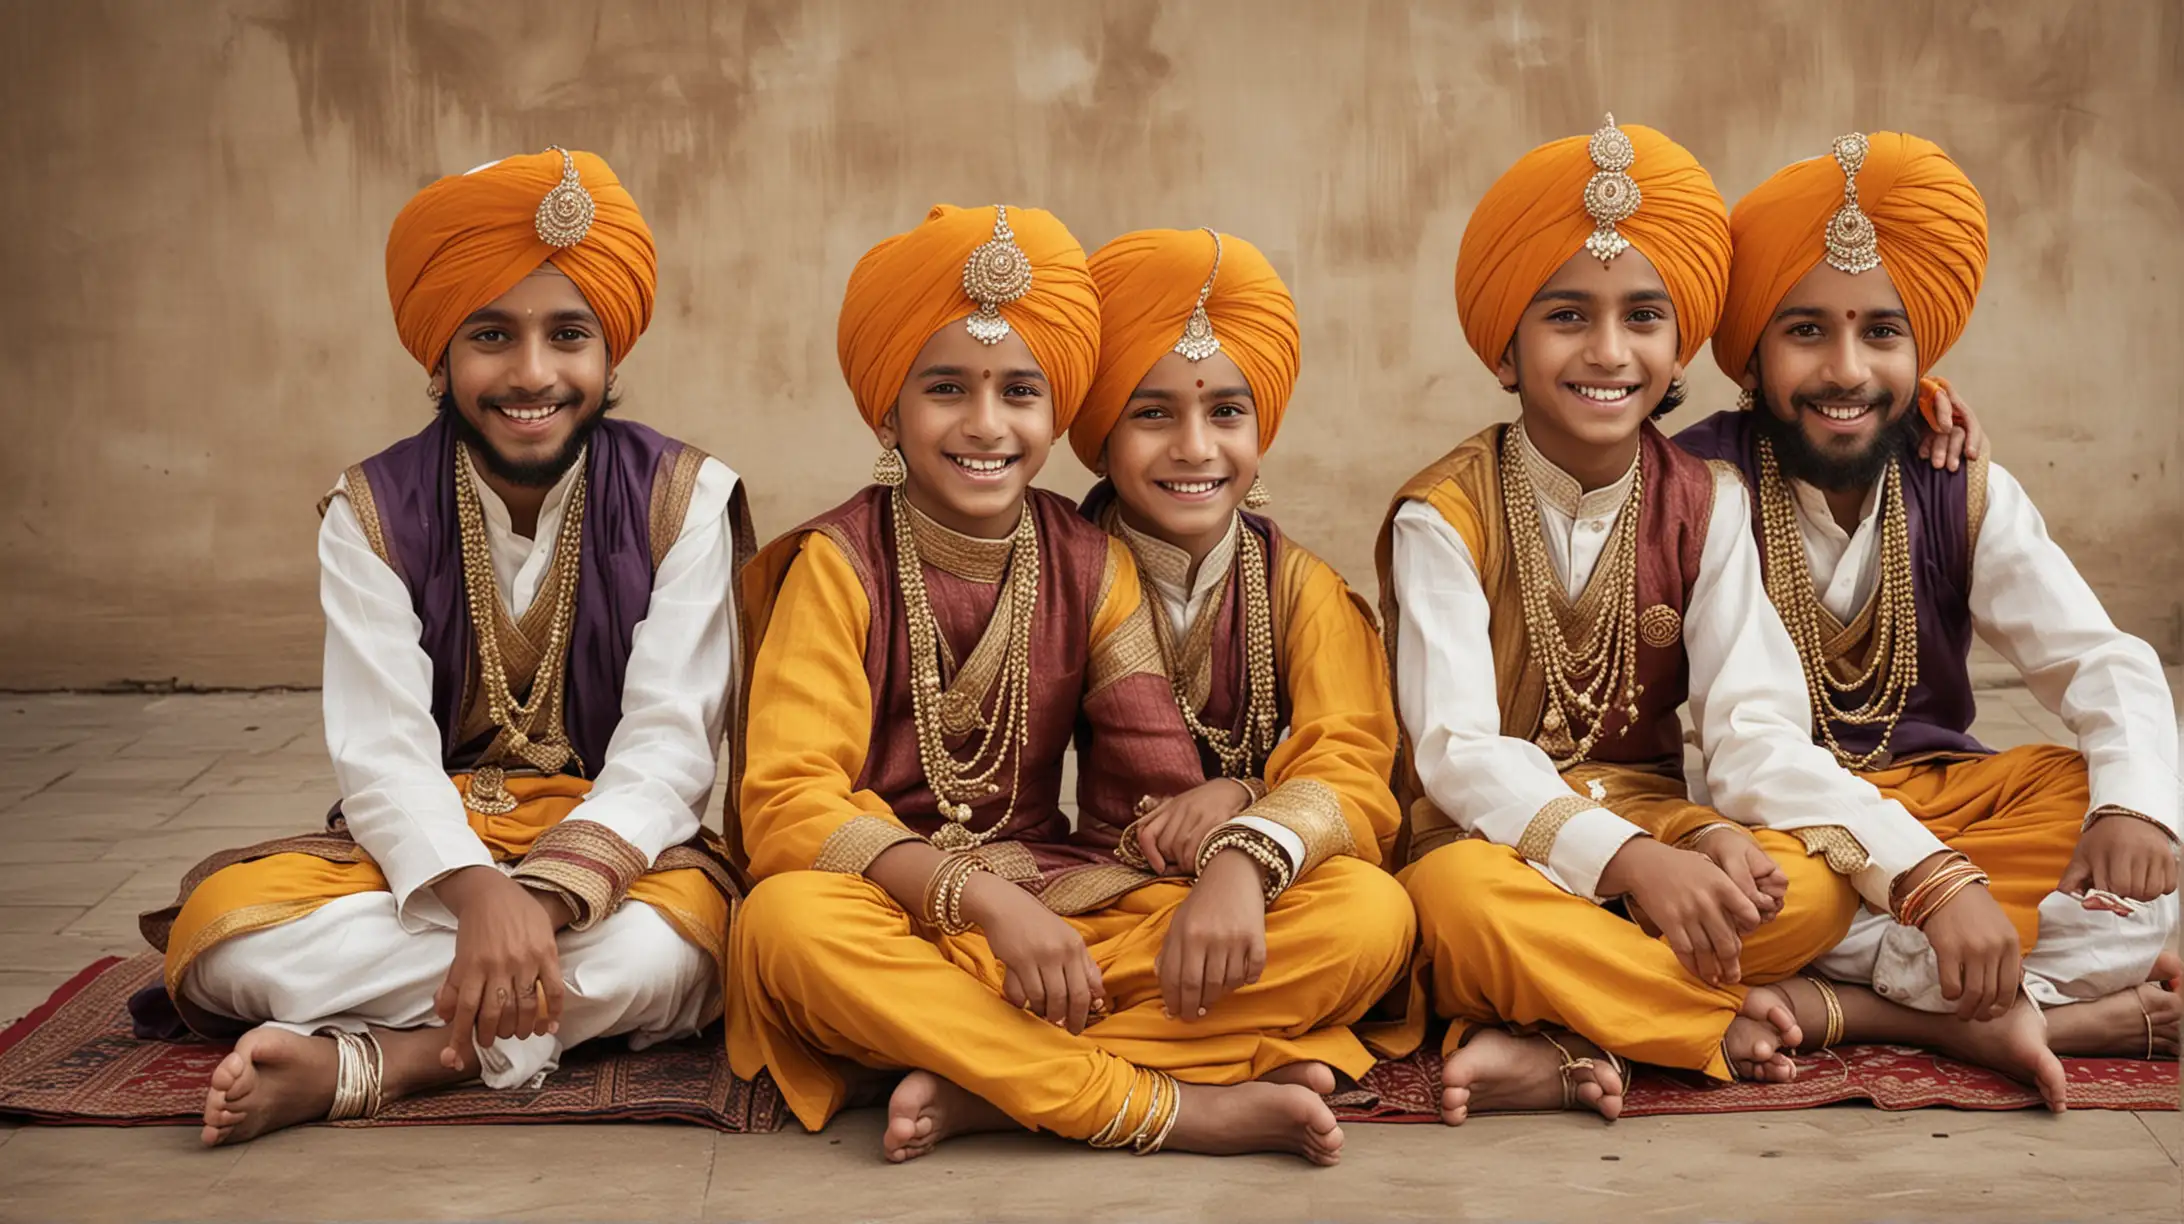 4 young sikh boys sitting down cross legged with smiles on their faces, dressed in regal clothing, set in India 300 years ago.